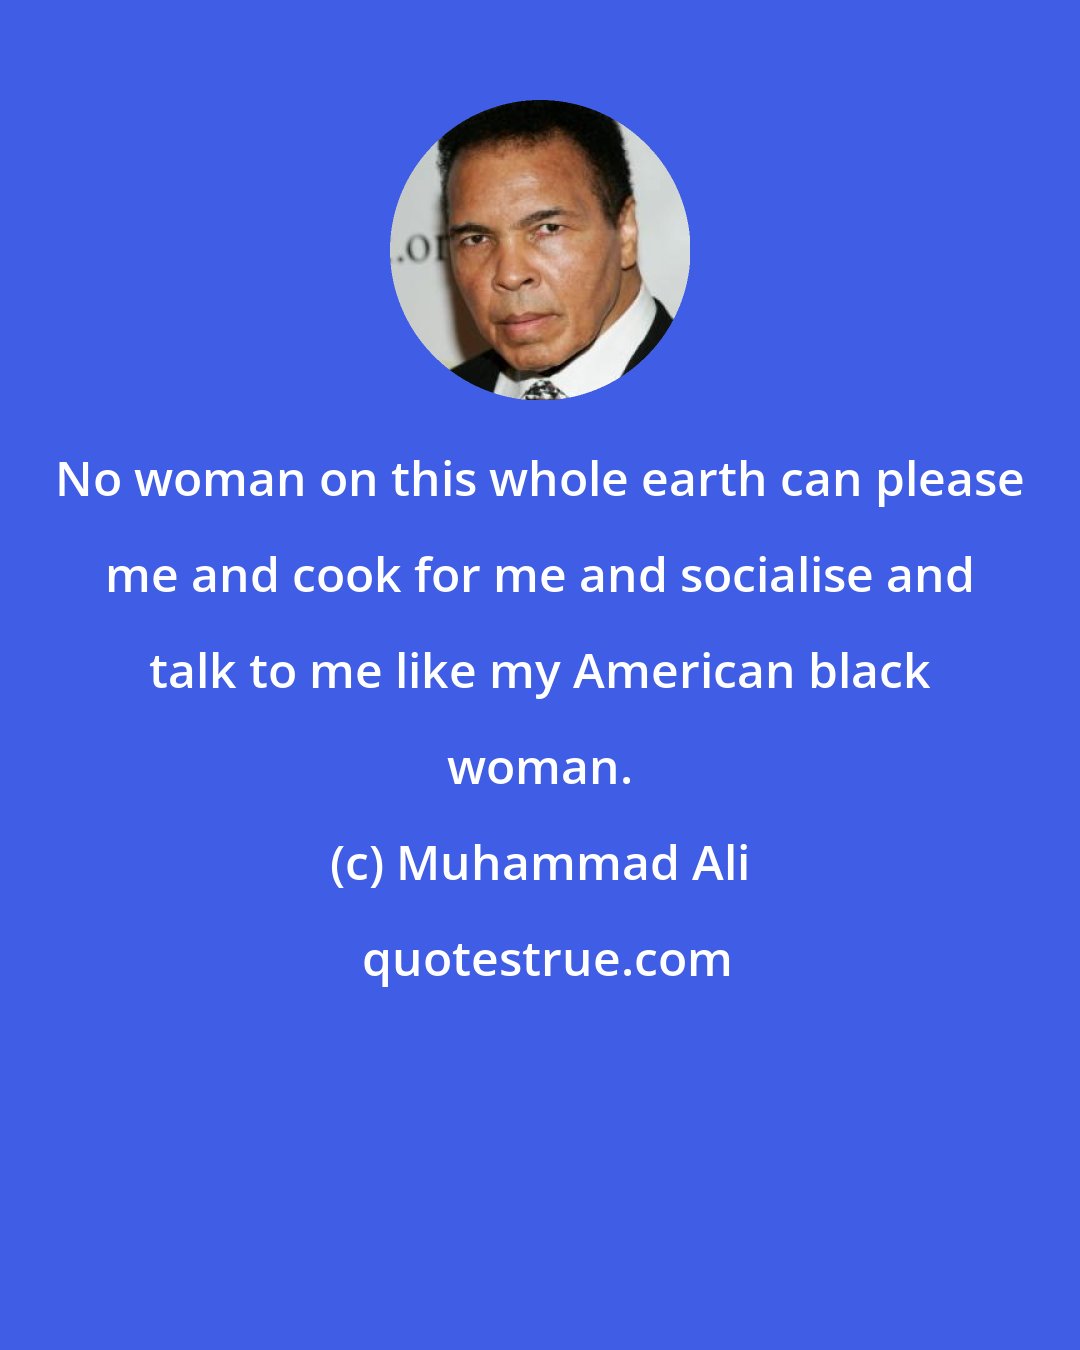 Muhammad Ali: No woman on this whole earth can please me and cook for me and socialise and talk to me like my American black woman.